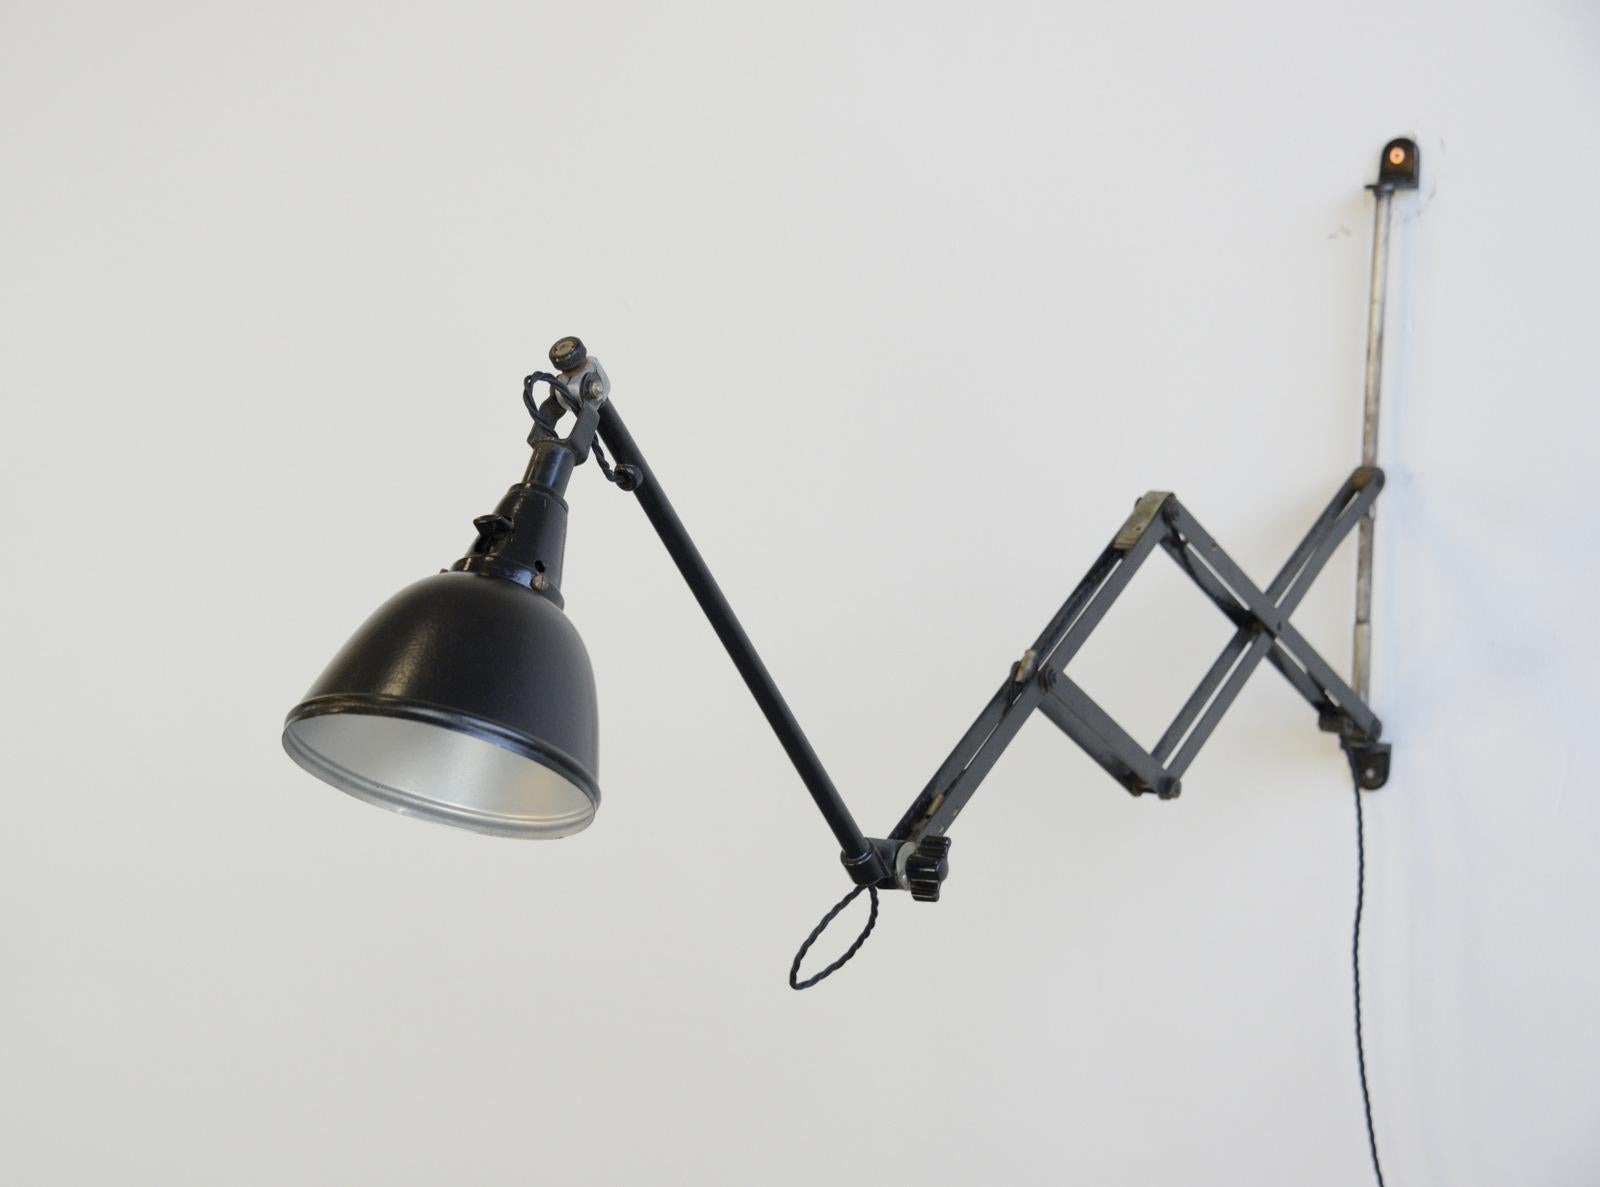 Model 110 scissor lamp by Curt Fischer for Midgard, 1930s

- Extendable scissor mechanism
- Steel shade
- Takes E27 fitting bulbs
- On/Off Switch on the cable
- Designed by Curt Fischer
- Produced by Midgard, Auma
- German, 1930s
-